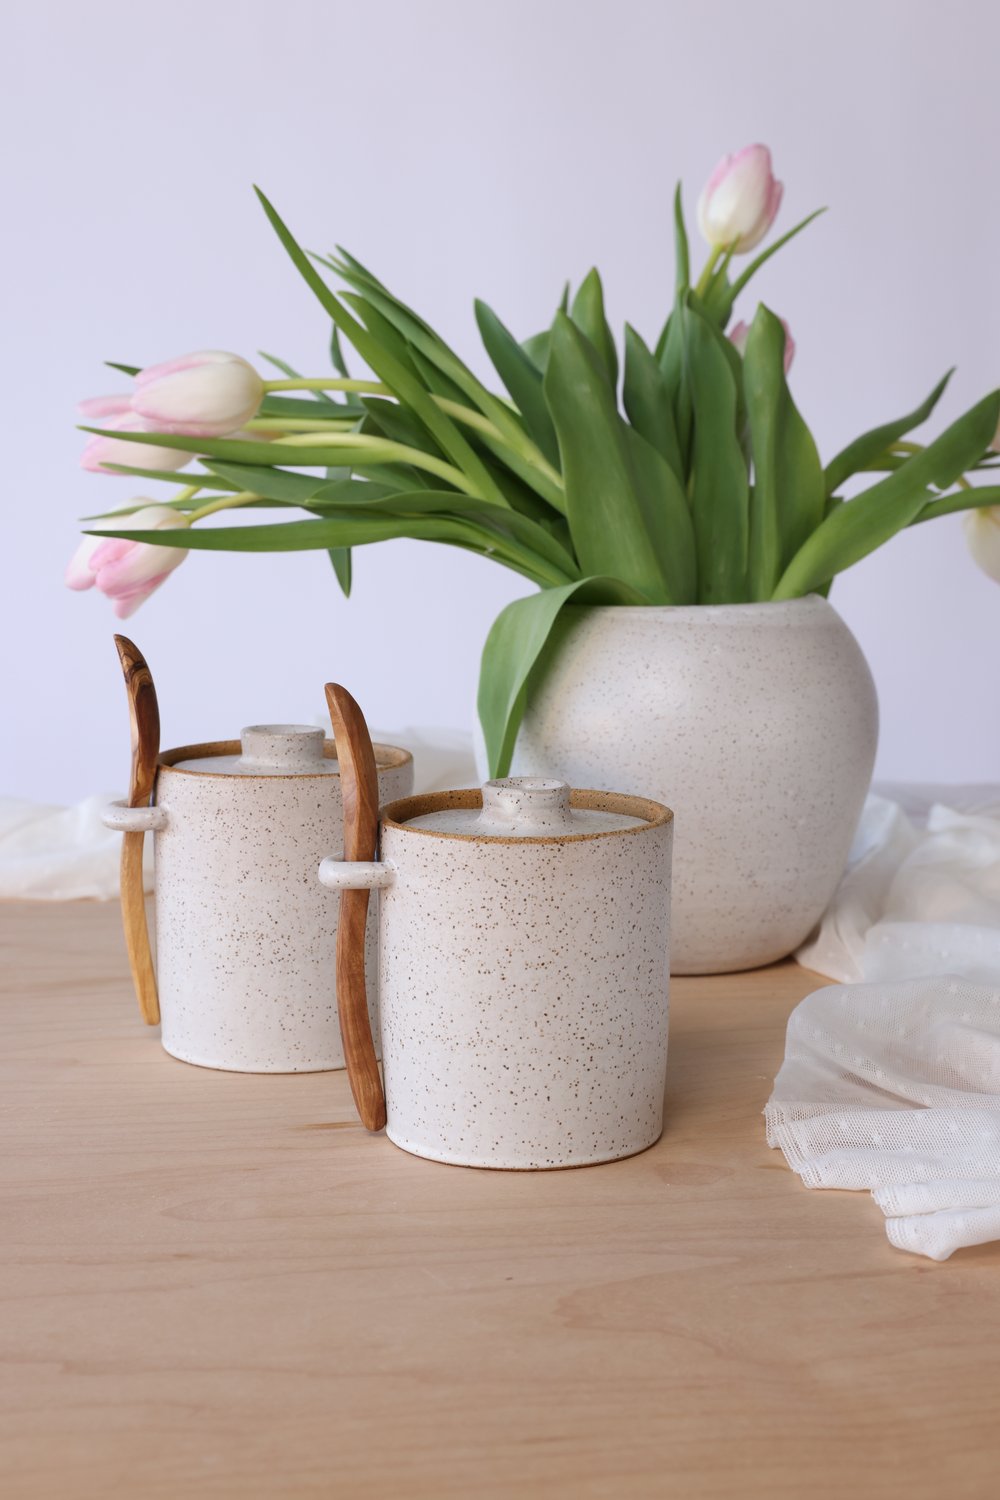 Modern Rustic Ceramic tableware for your everyday rituals